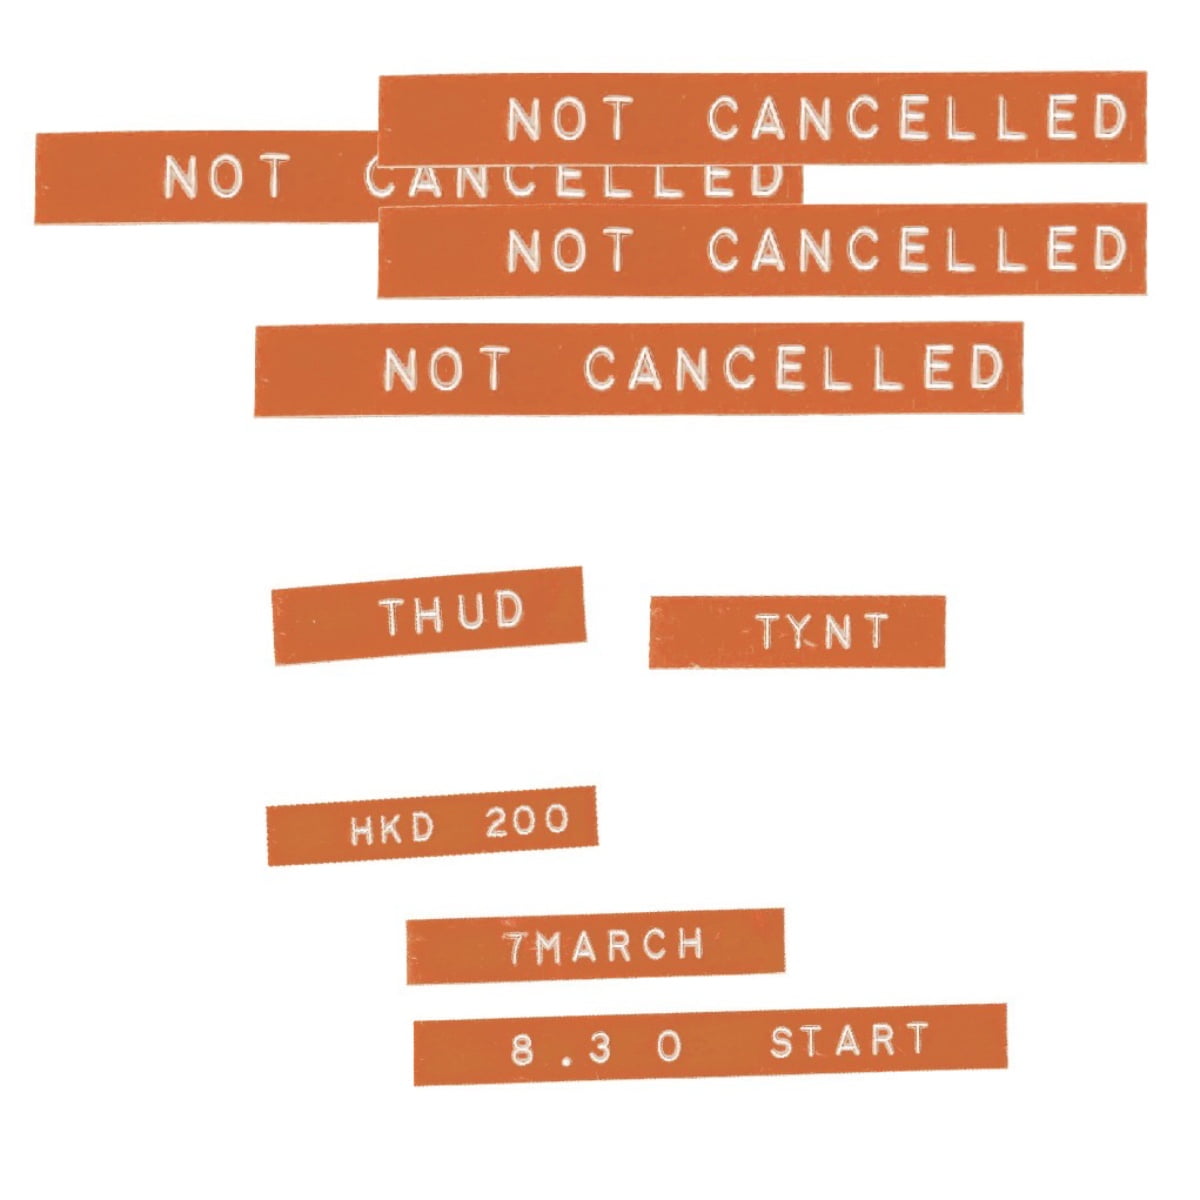 TYNT + Thud – (Not Cancelled)